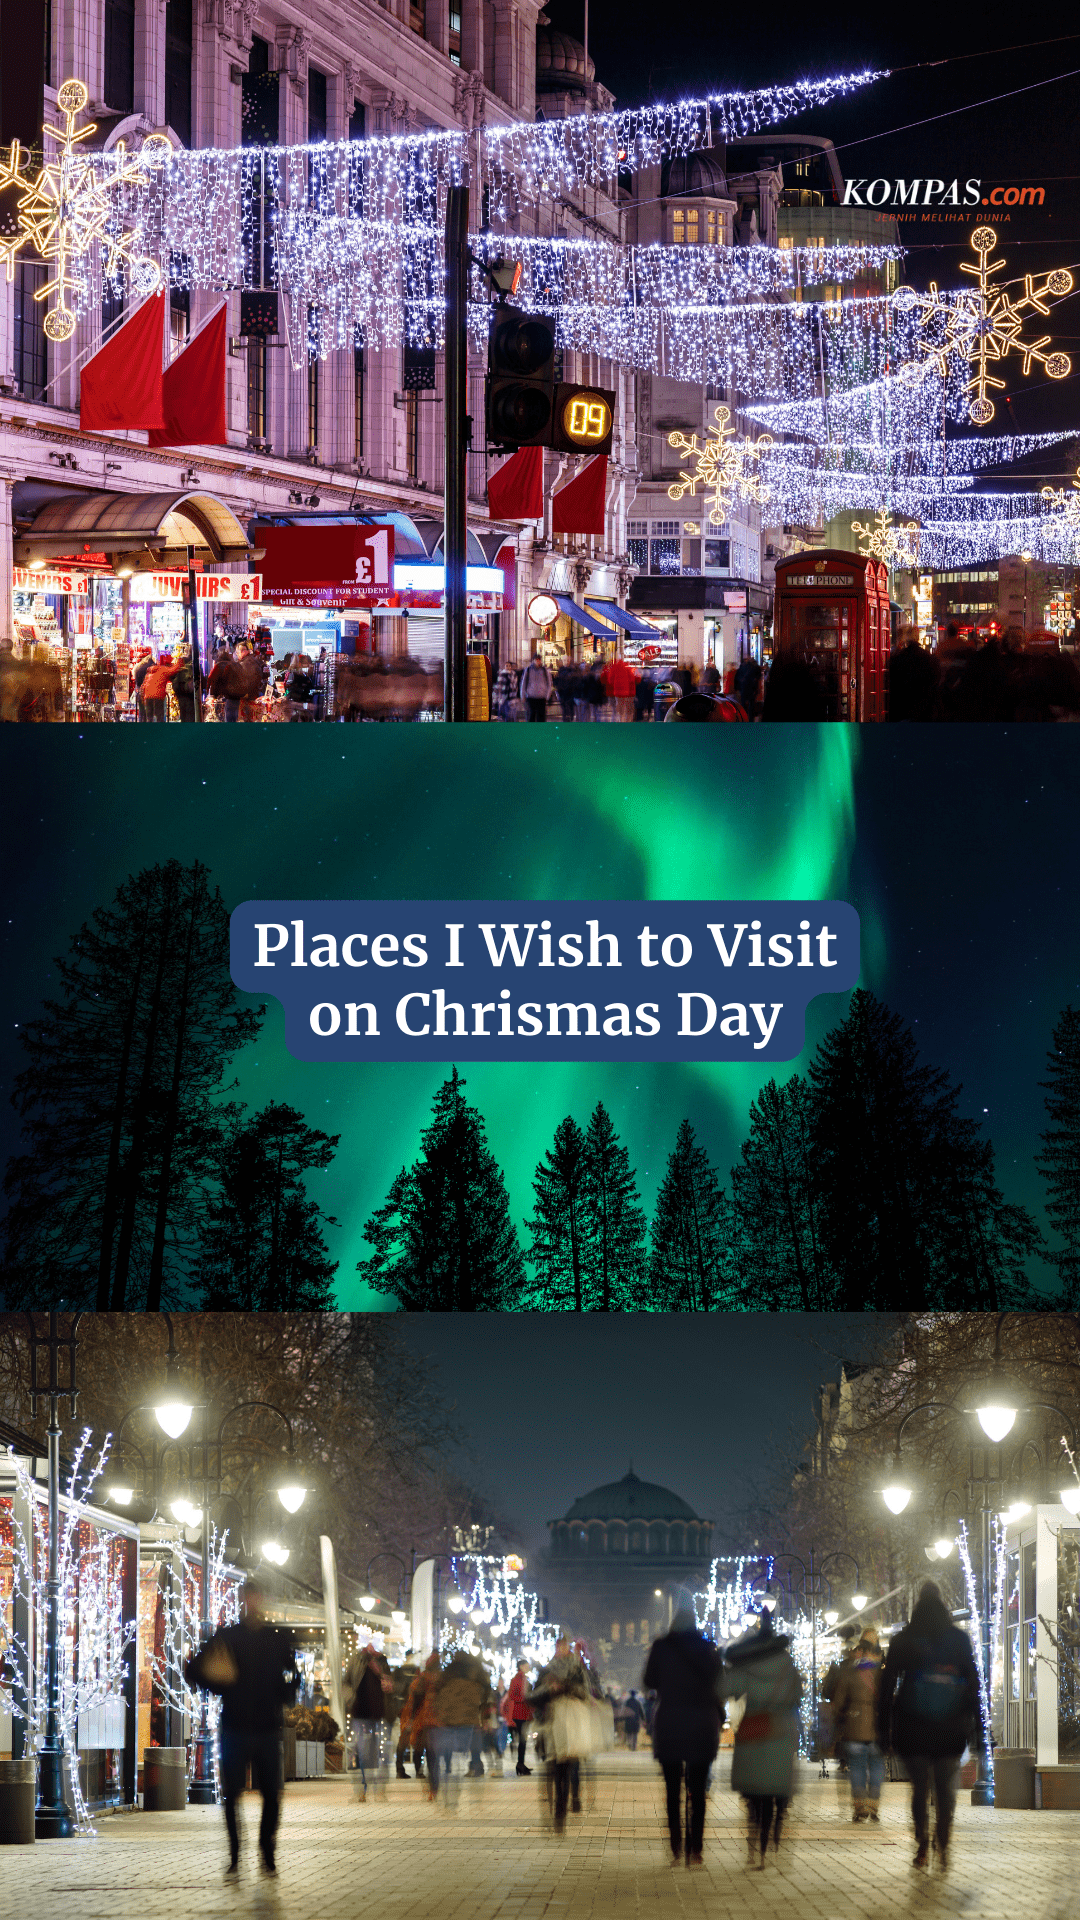 Places I Wish to Visit on Christmas Day